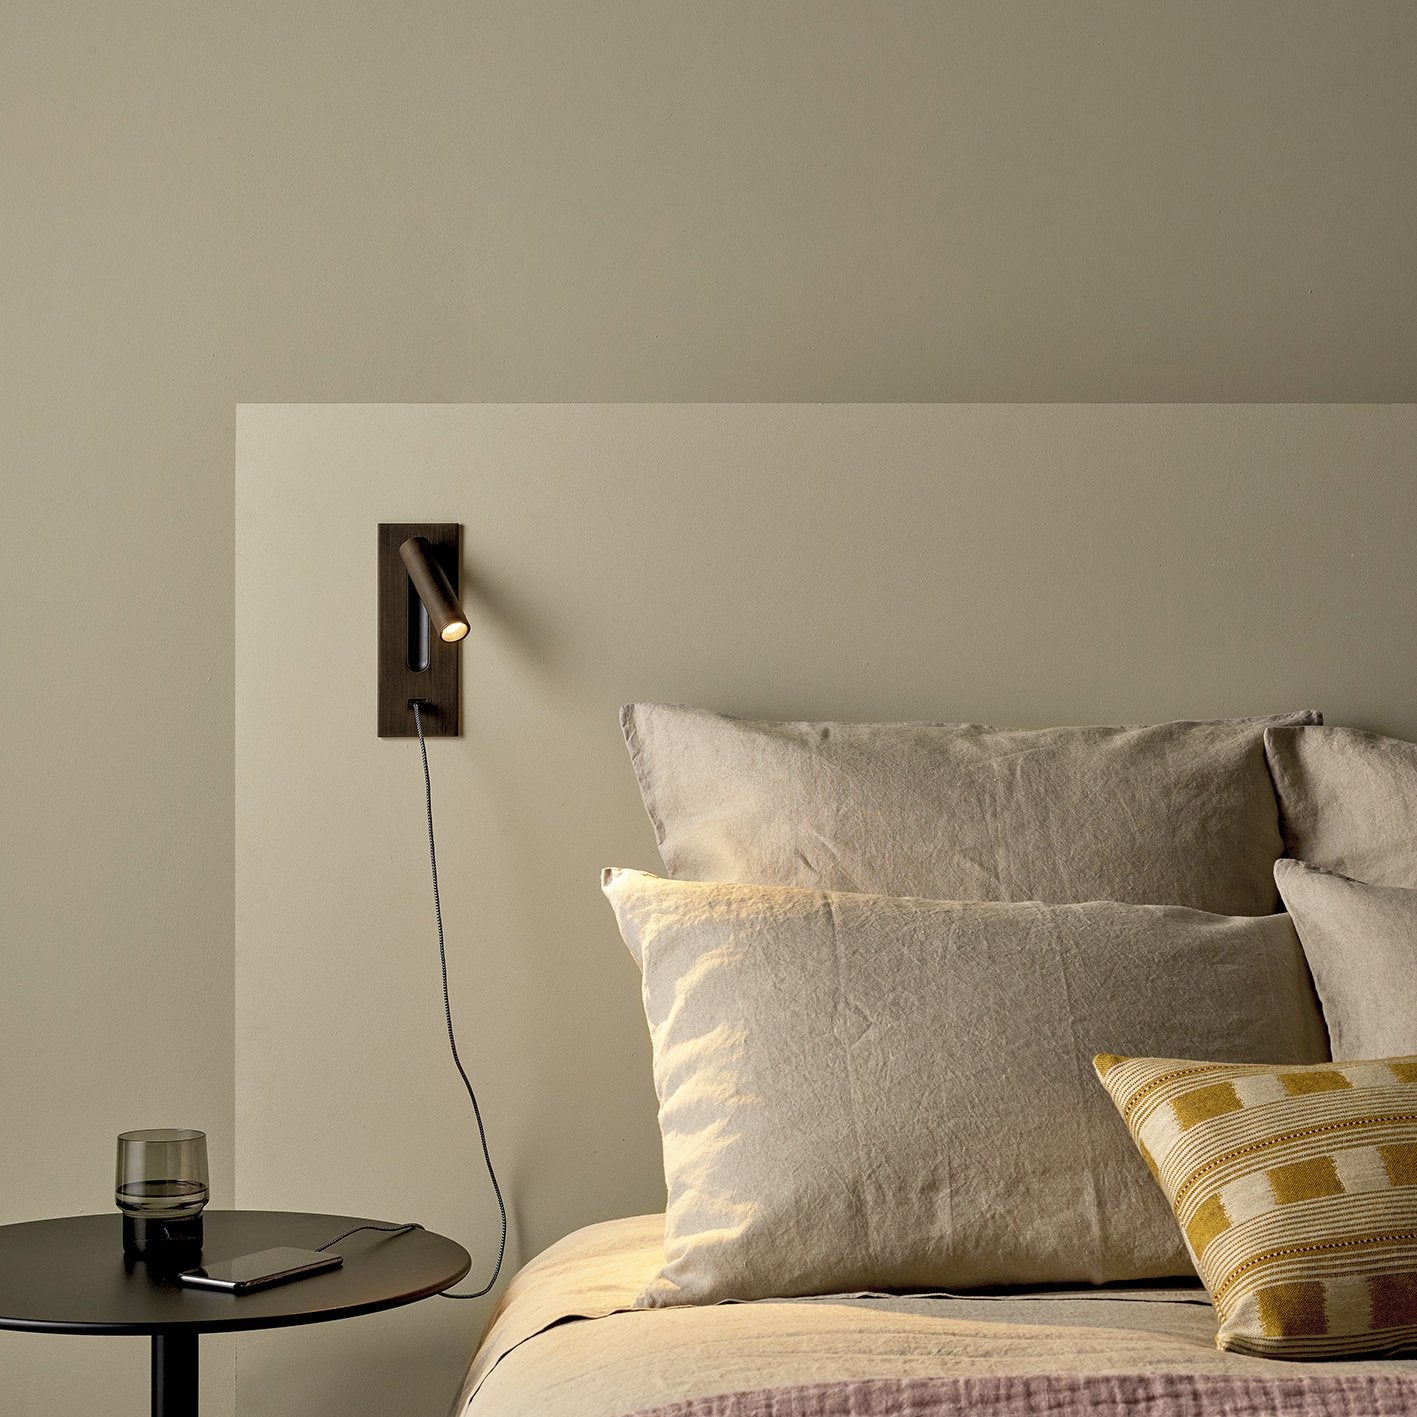 Fuse Switched LED Sconce.